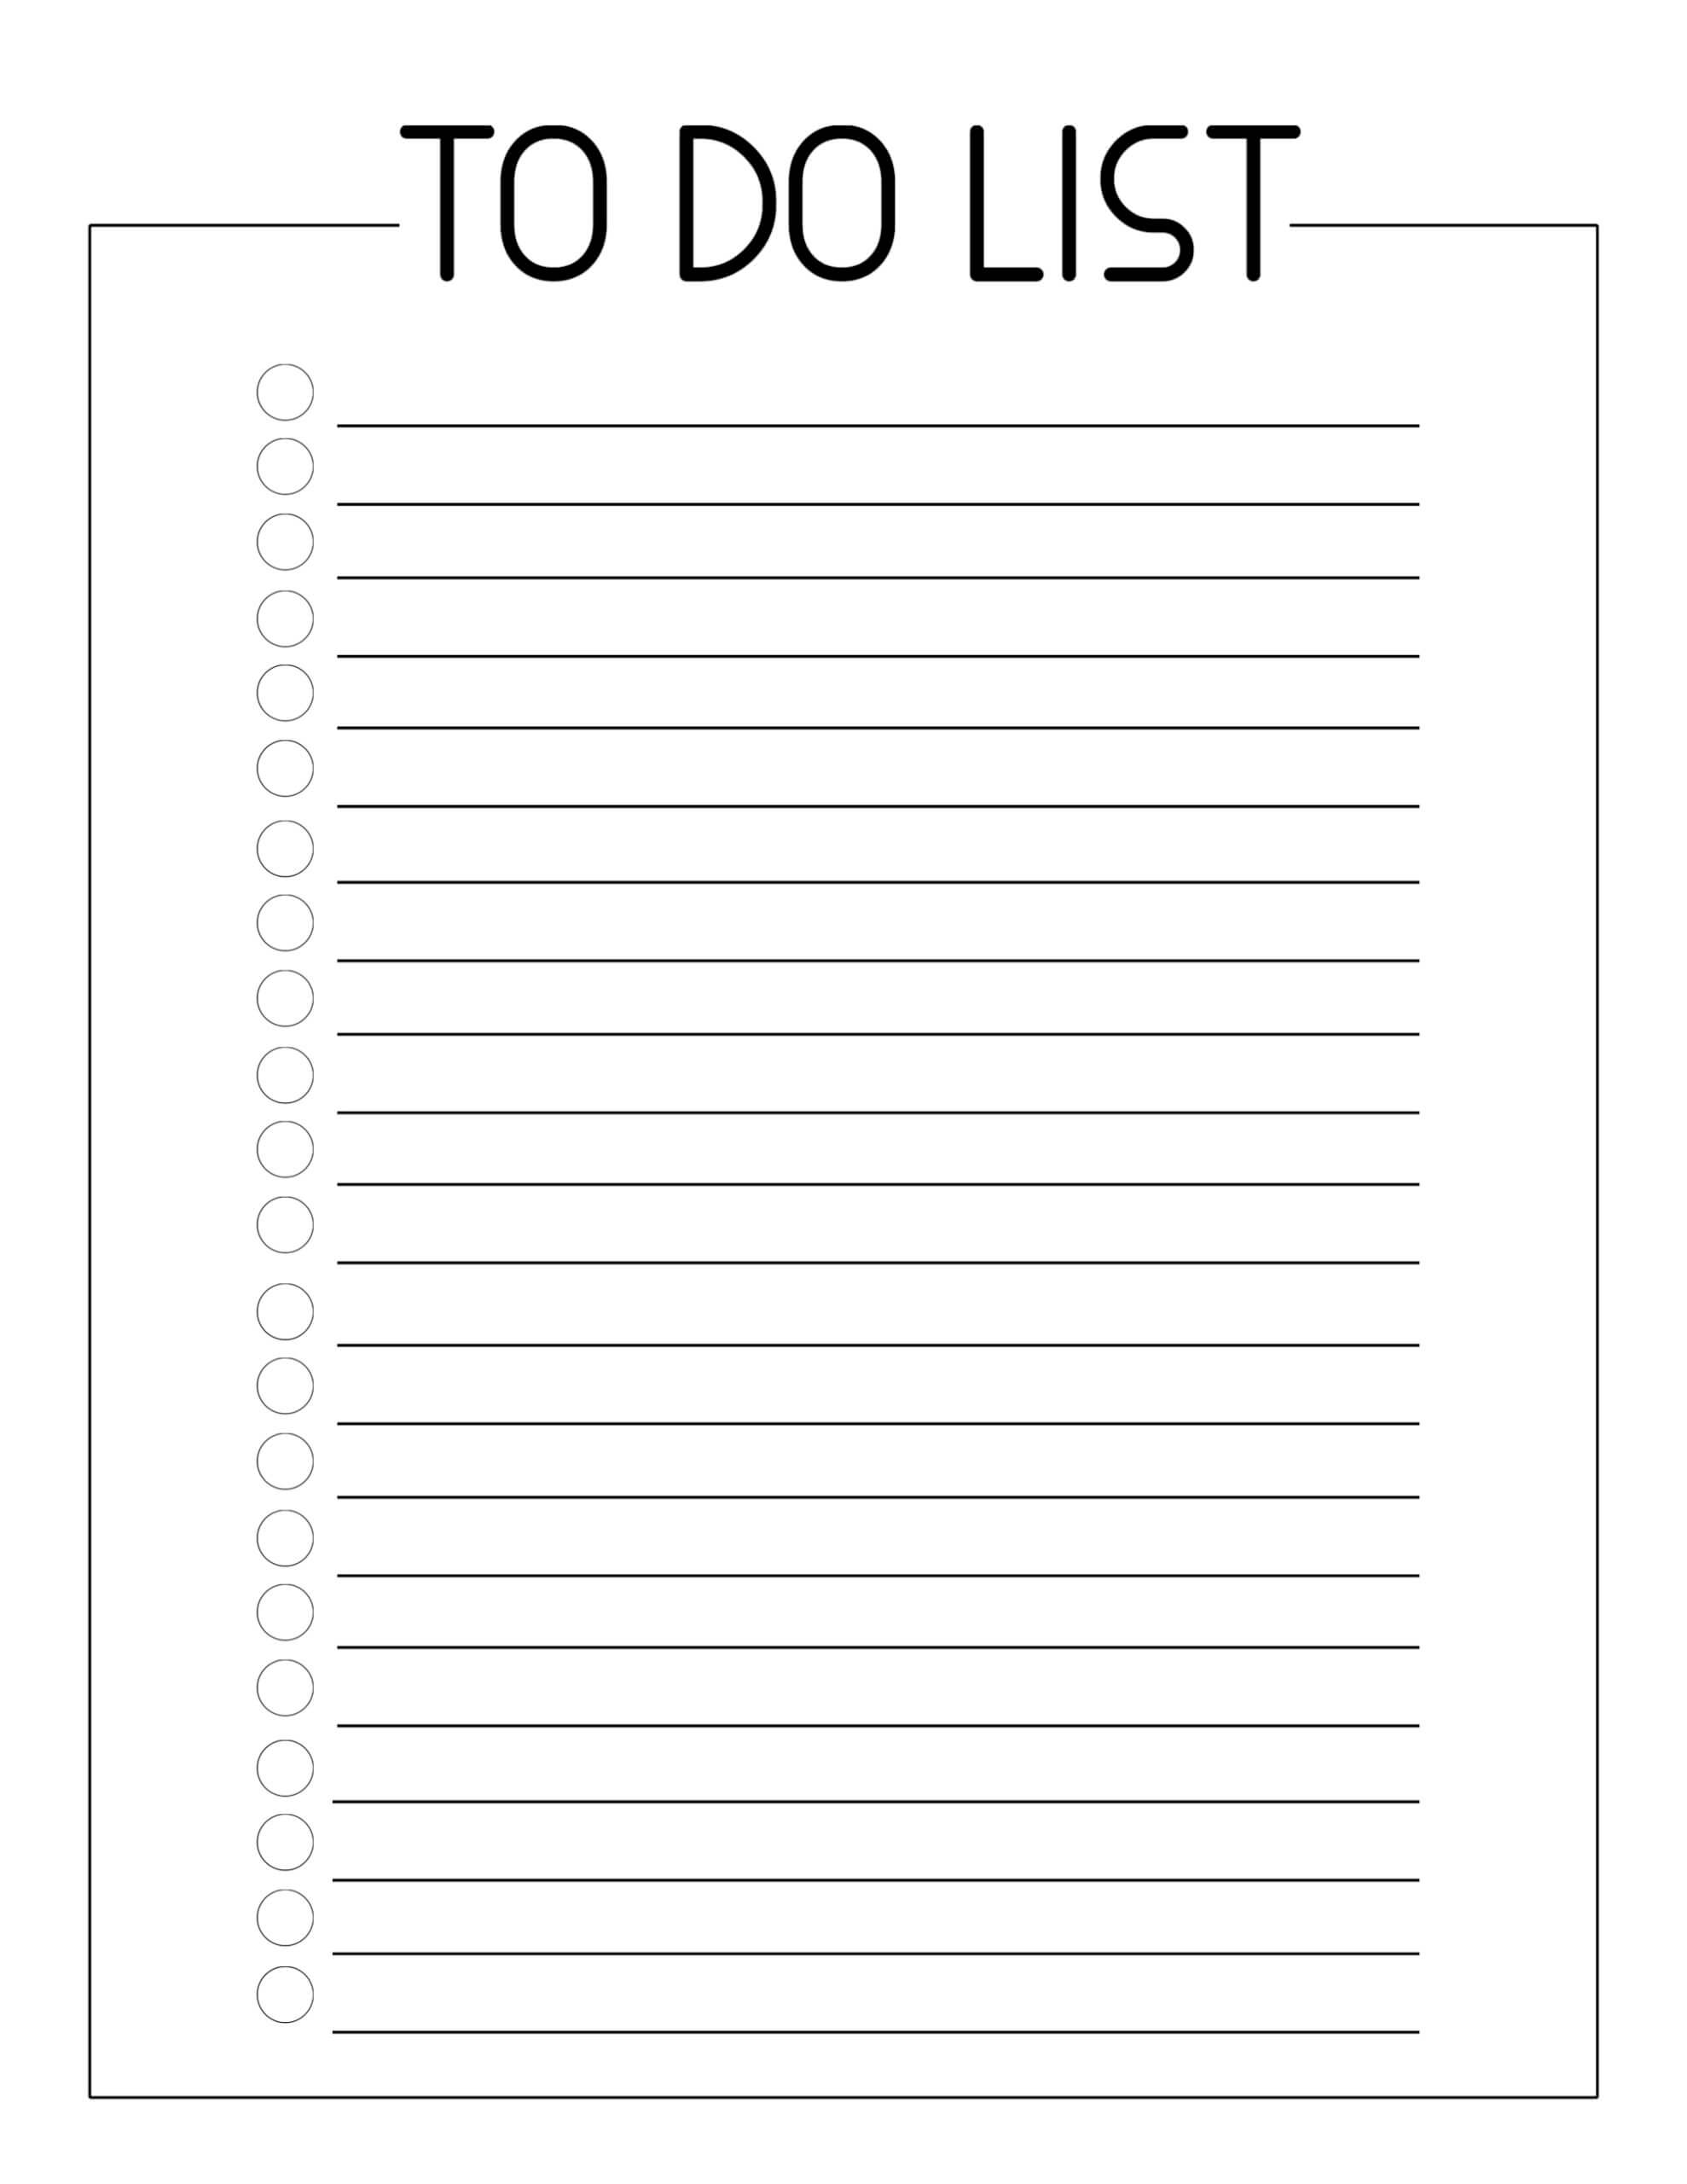 Free Printable To Do Checklist Template - Paper Trail Design Throughout Blank To Do List Template